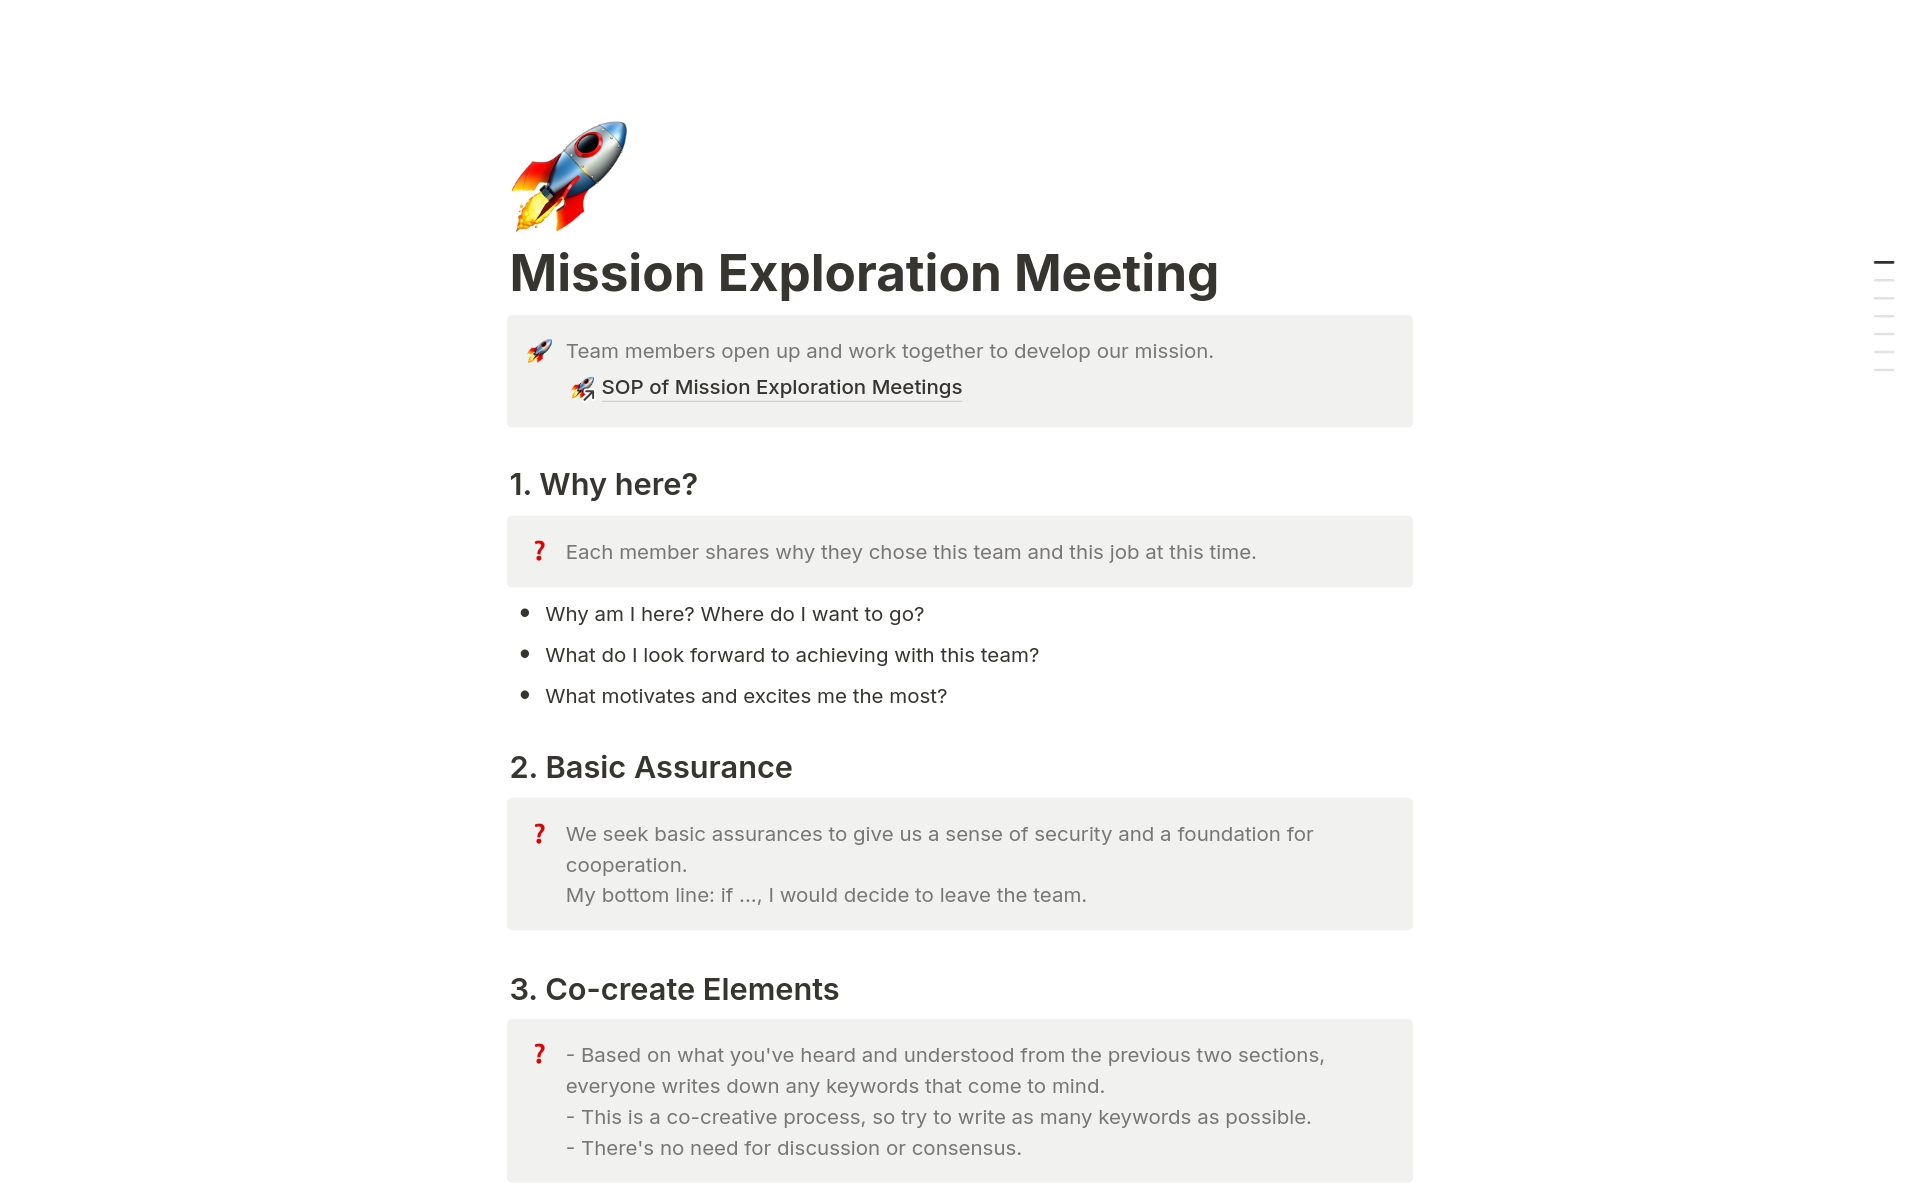 This mission exploration meeting agenda template is ideal for brainstorming, defining goals, exploring new opportunities, and setting the direction for future projects or initiatives.